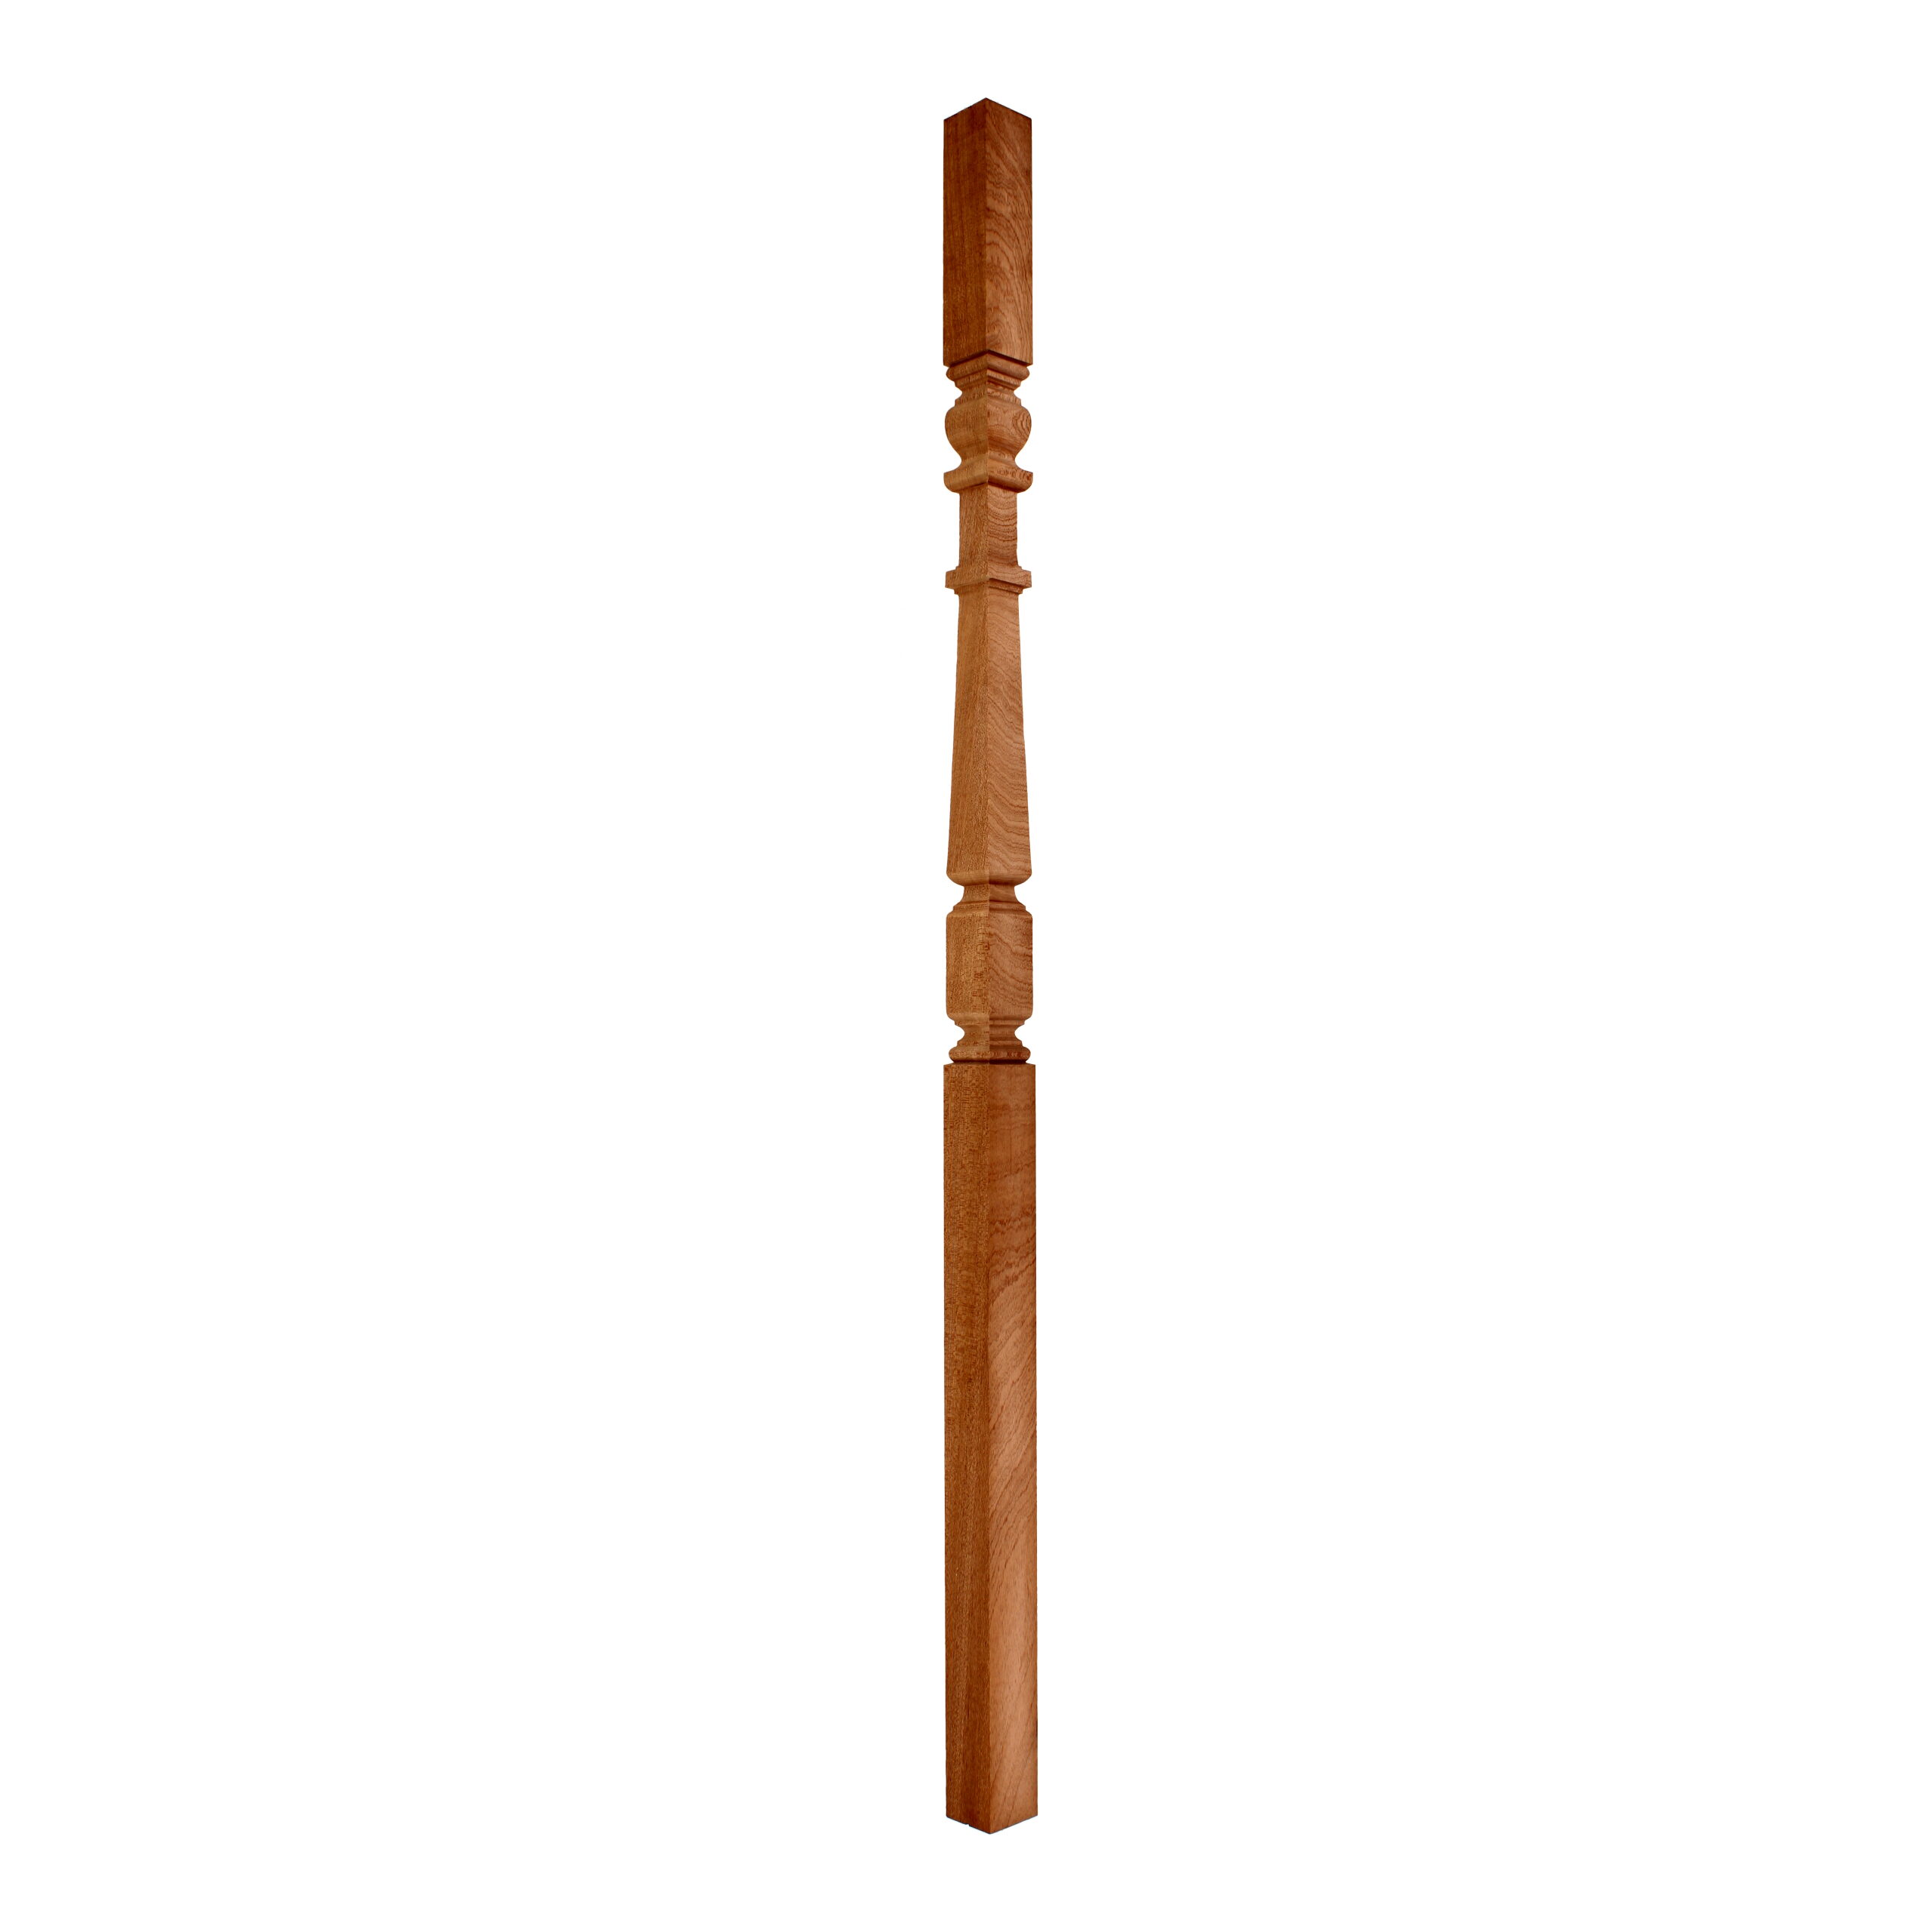 Mahogany-Square Turned Staircase Spindle Edwardian-41mm x 1100 - Wooden staircase spindle.